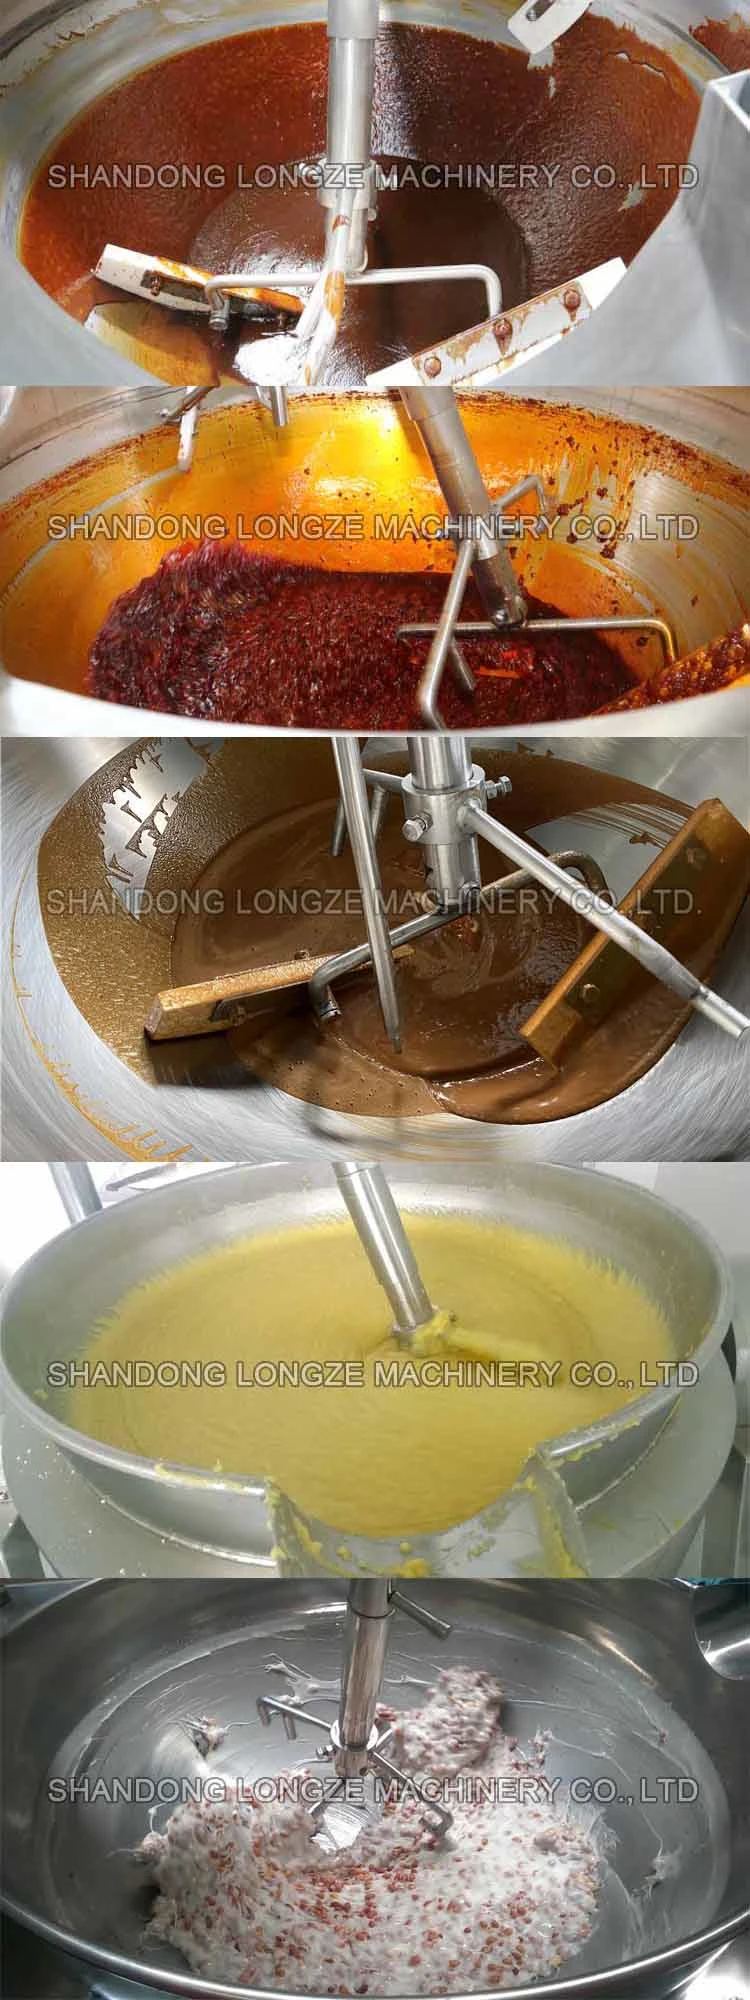 High Quality Electric Chili Suace Gas Steam Cooking Mixer Machine Cooking Equipment for Sale